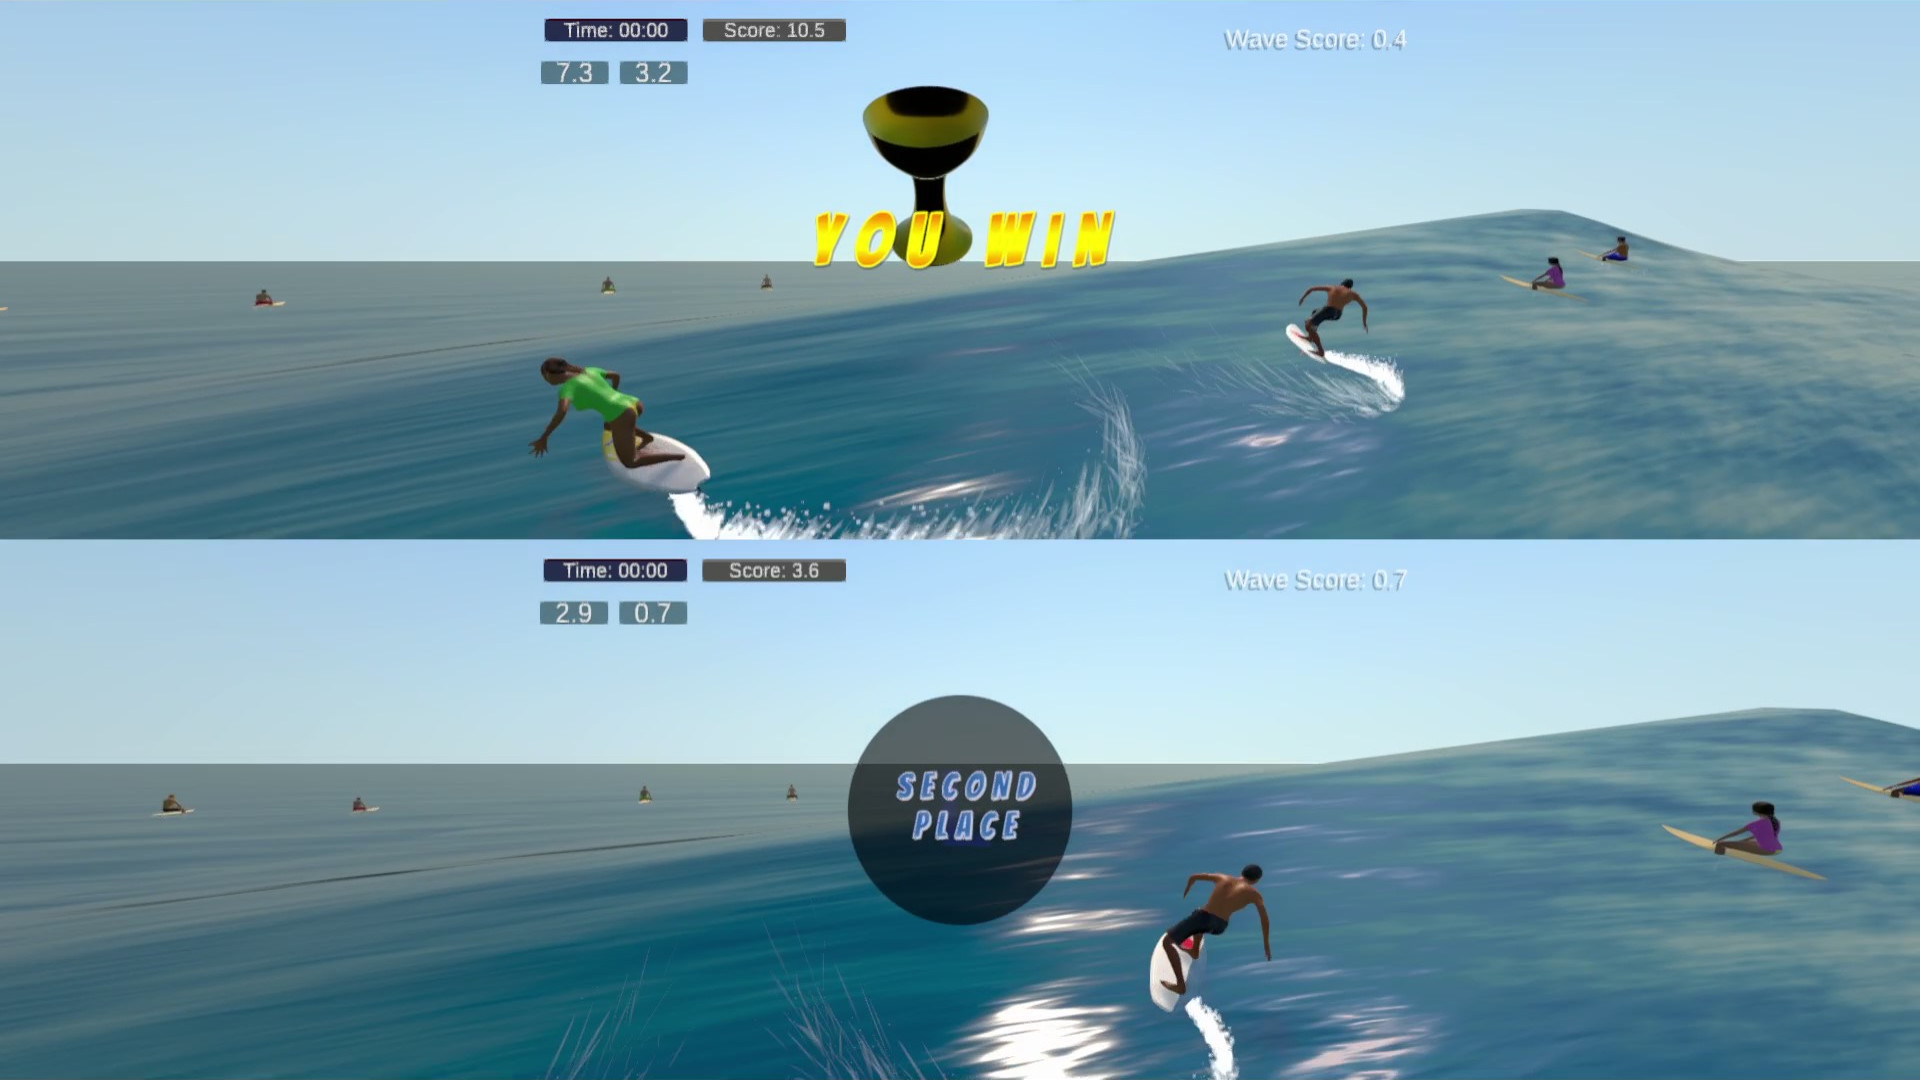 The Endless Summer - Search For Surf Free Download